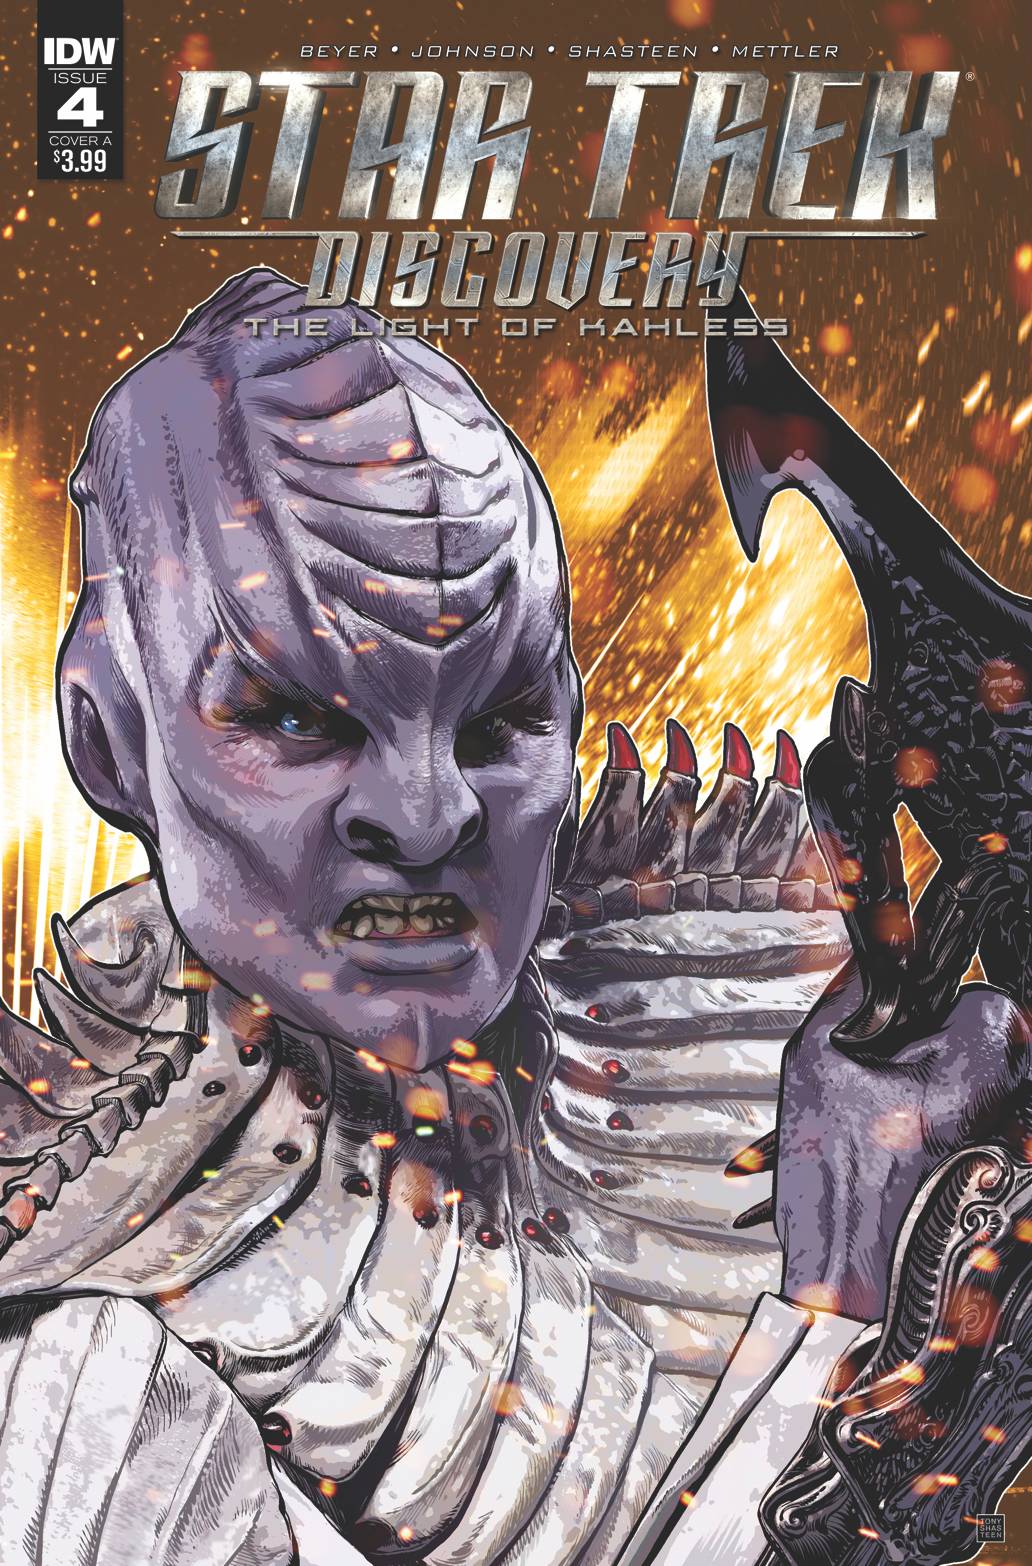 Star Trek Discovery #4 Cover A Shasteen